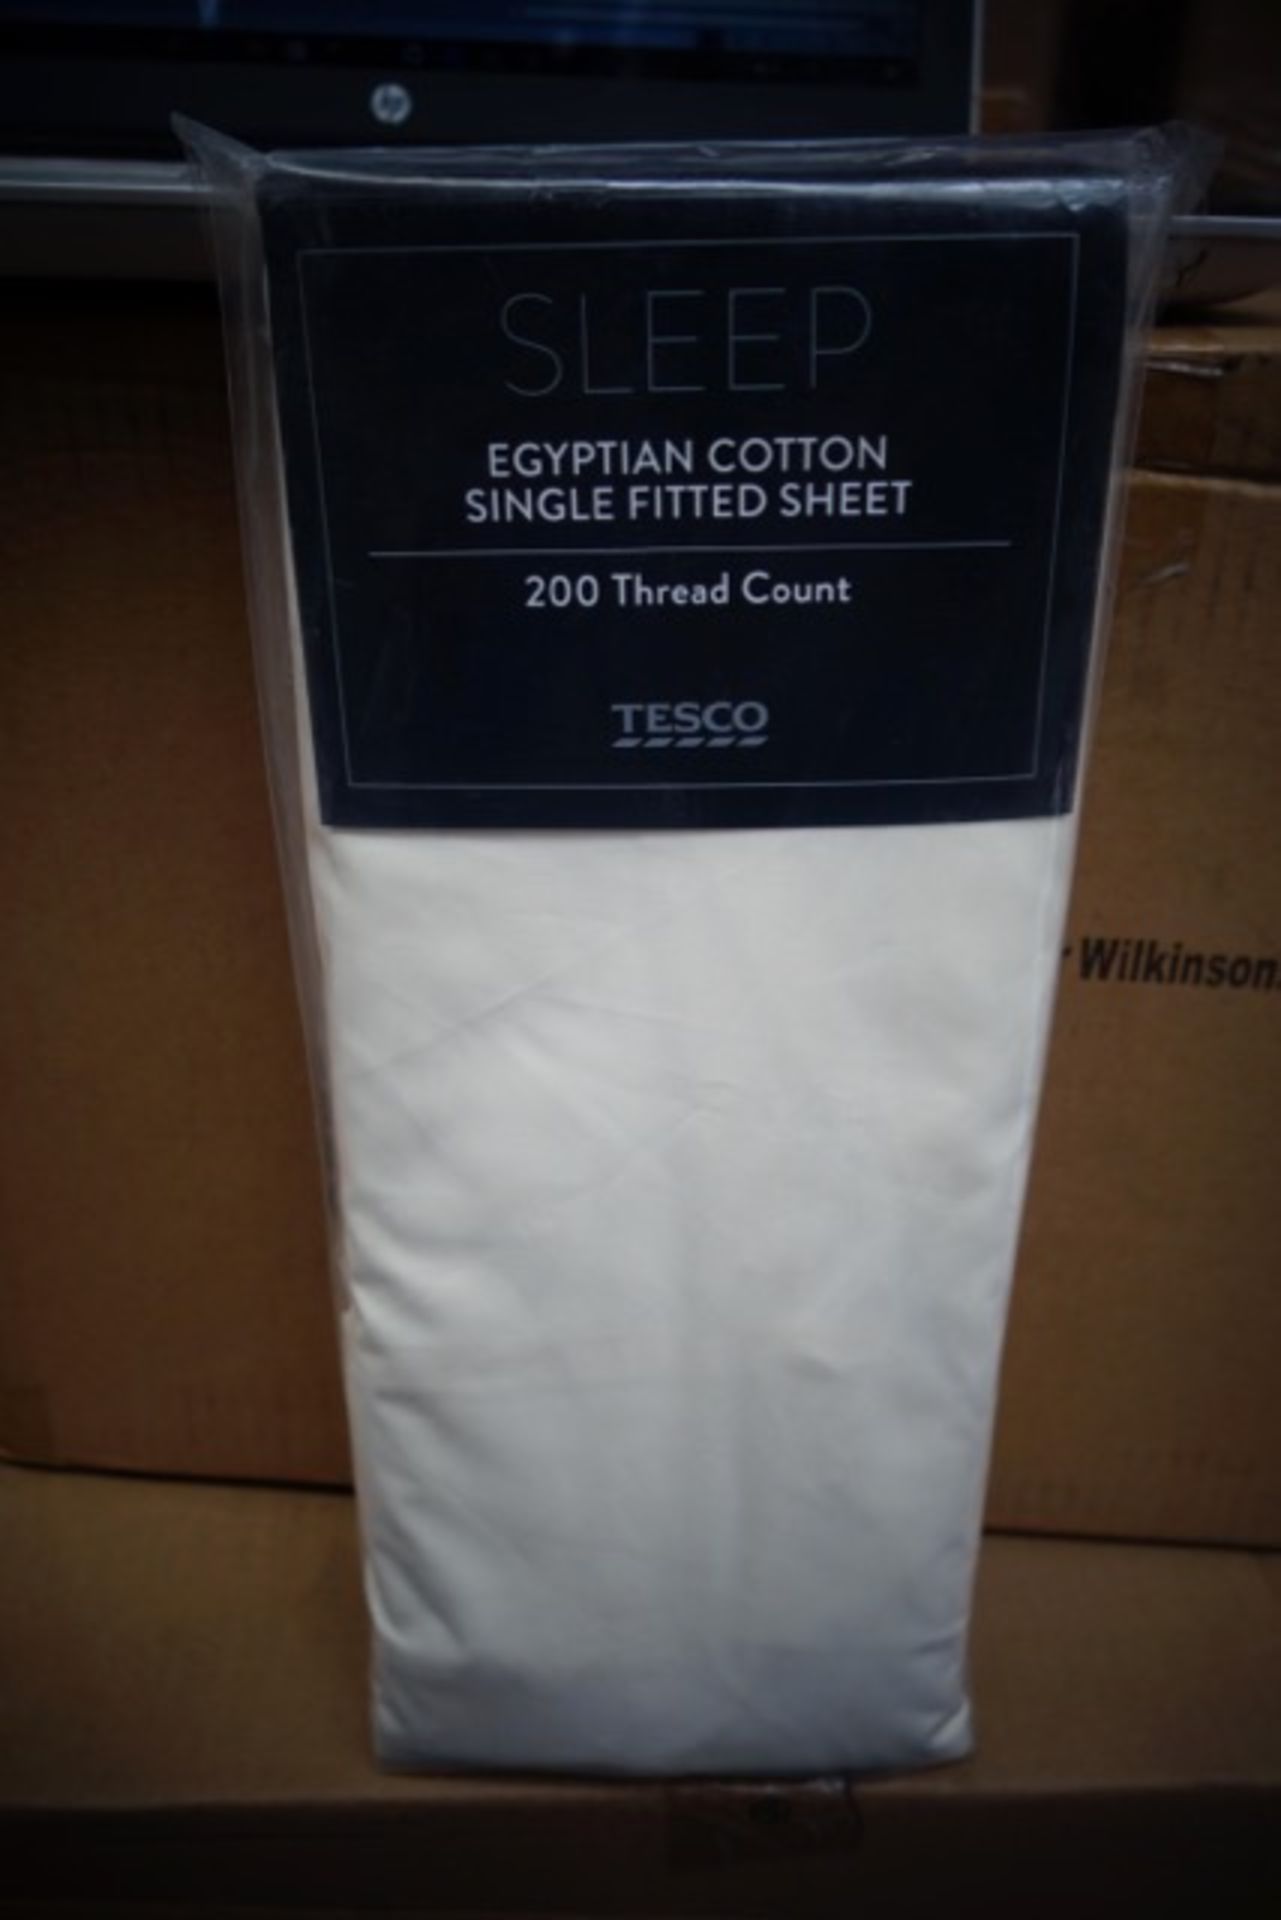 25 x Brand New Sleep Egyptian Cotton Single Fitted Sheets - 200 Thread Count. RRP £12.99 each